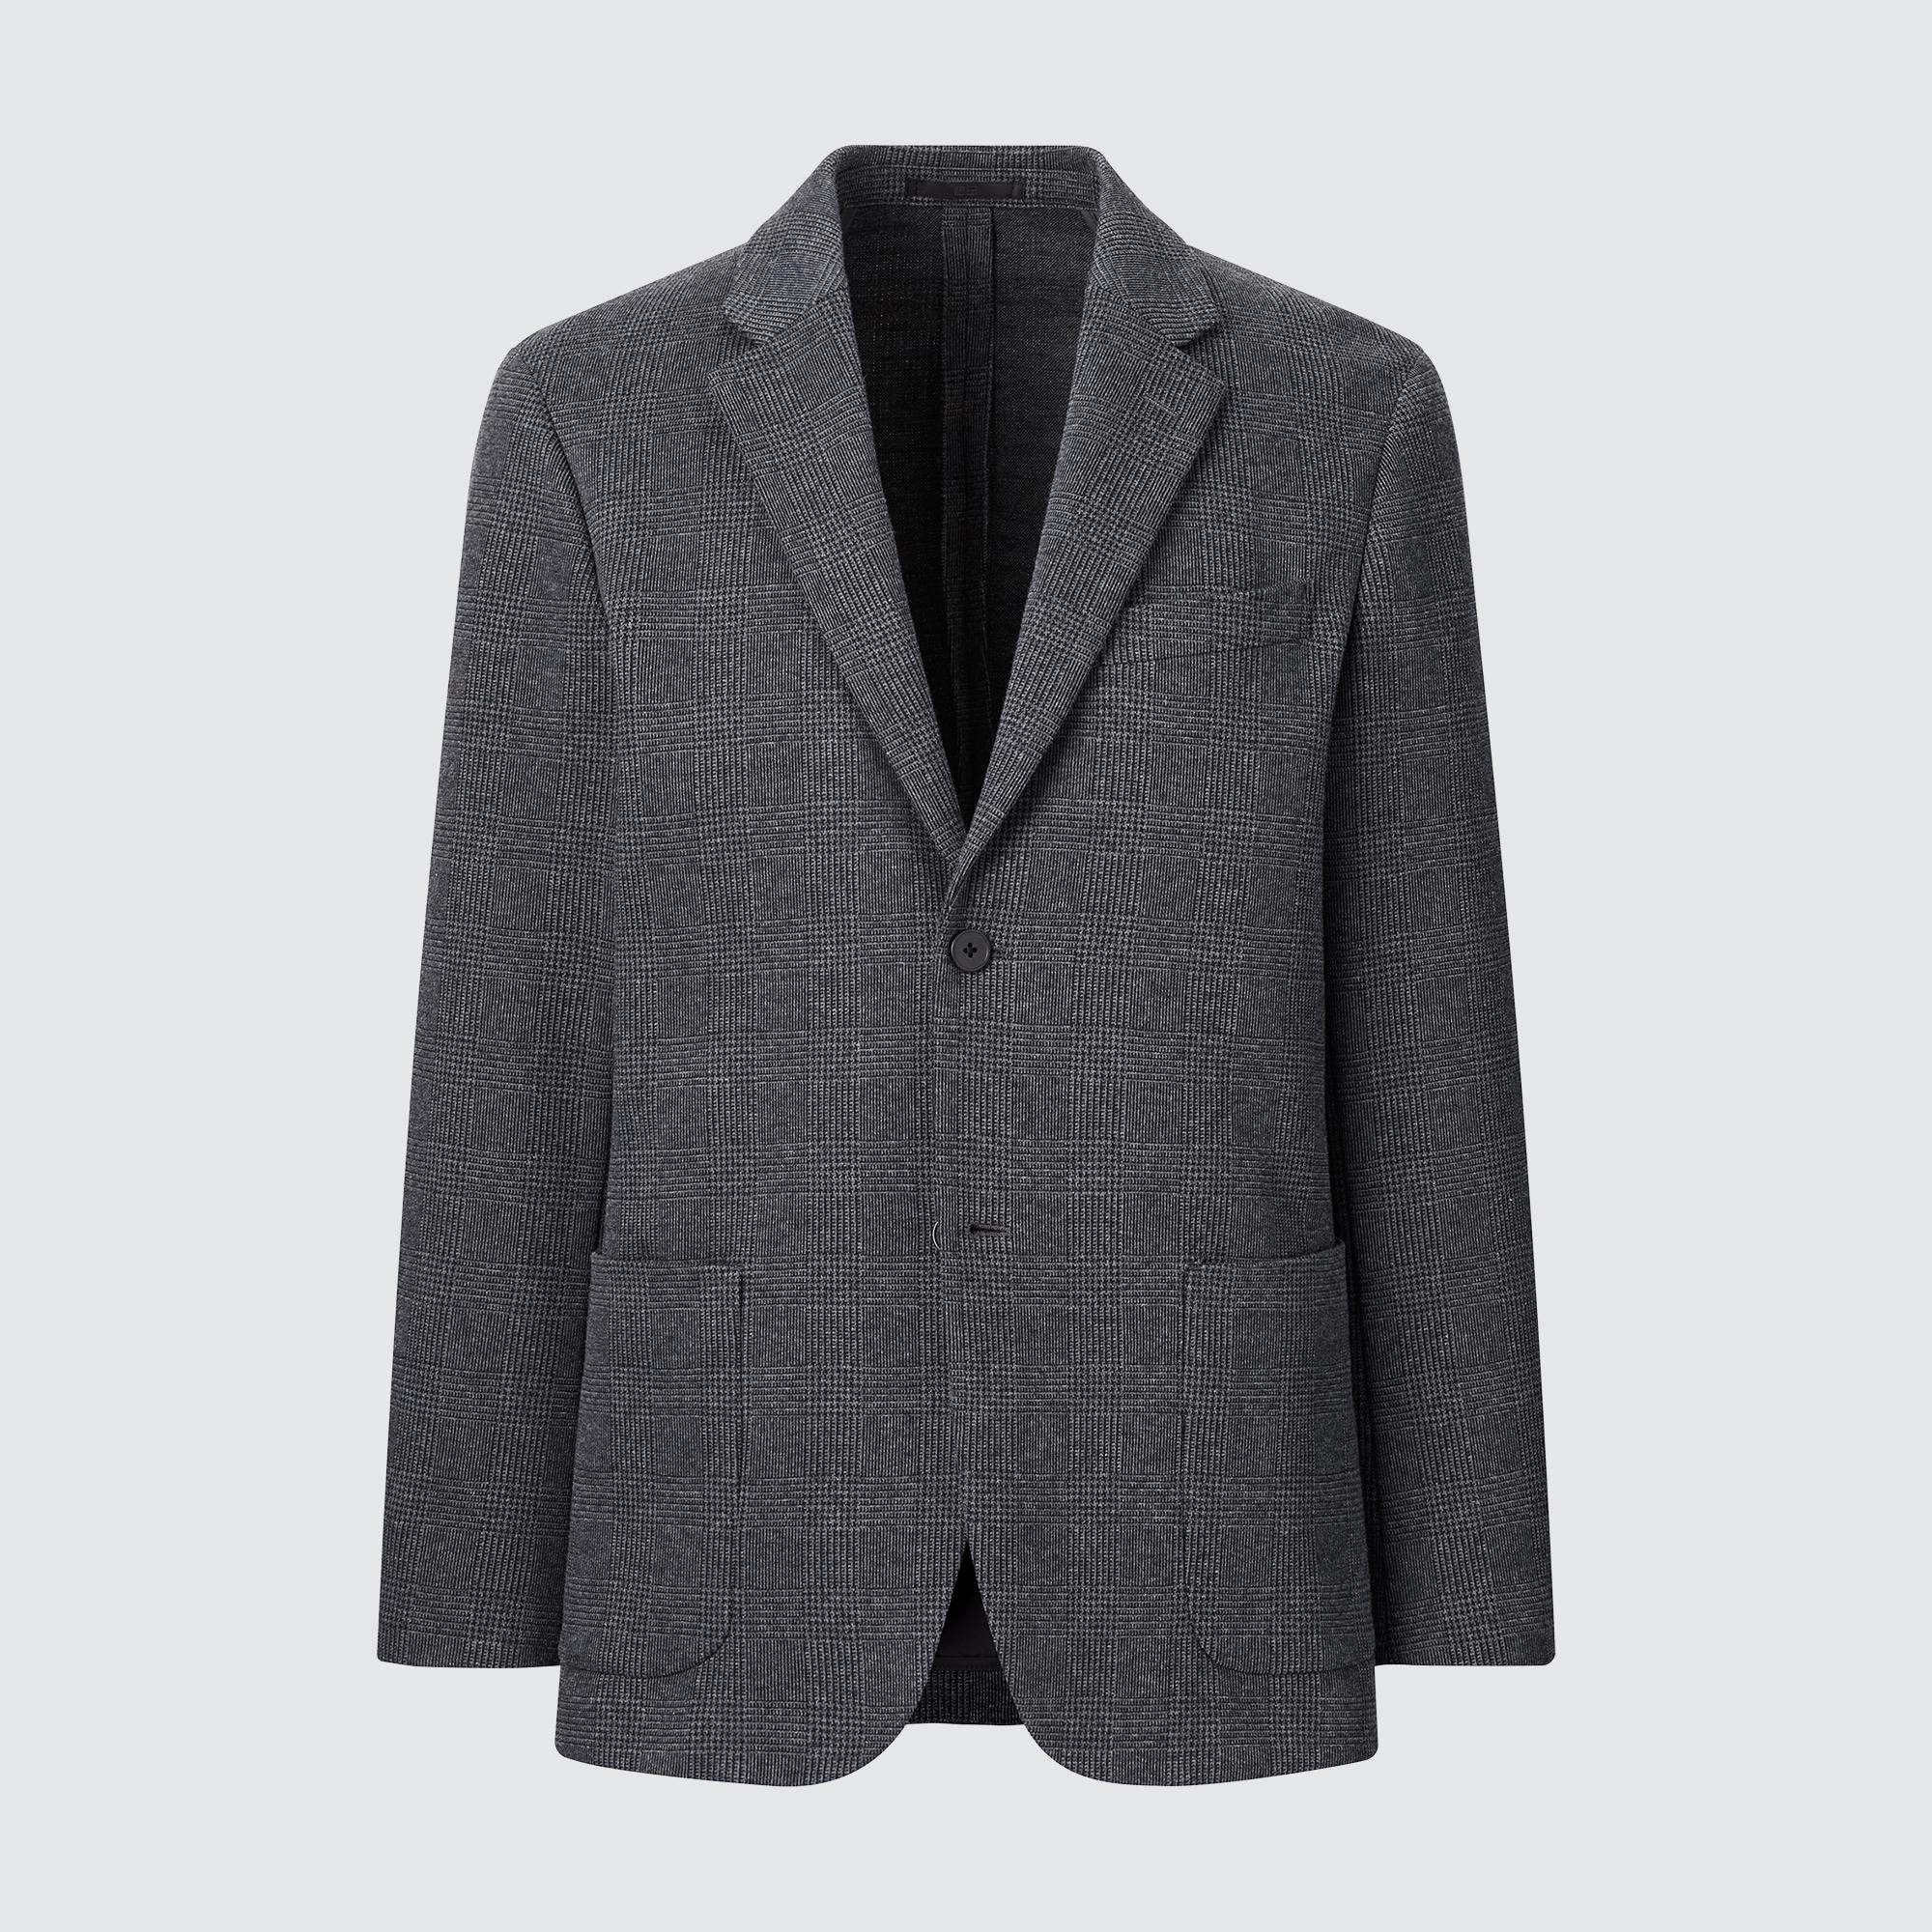 UNIQLO Comfort Jacket Review Perfect Casual Everyday Blazer